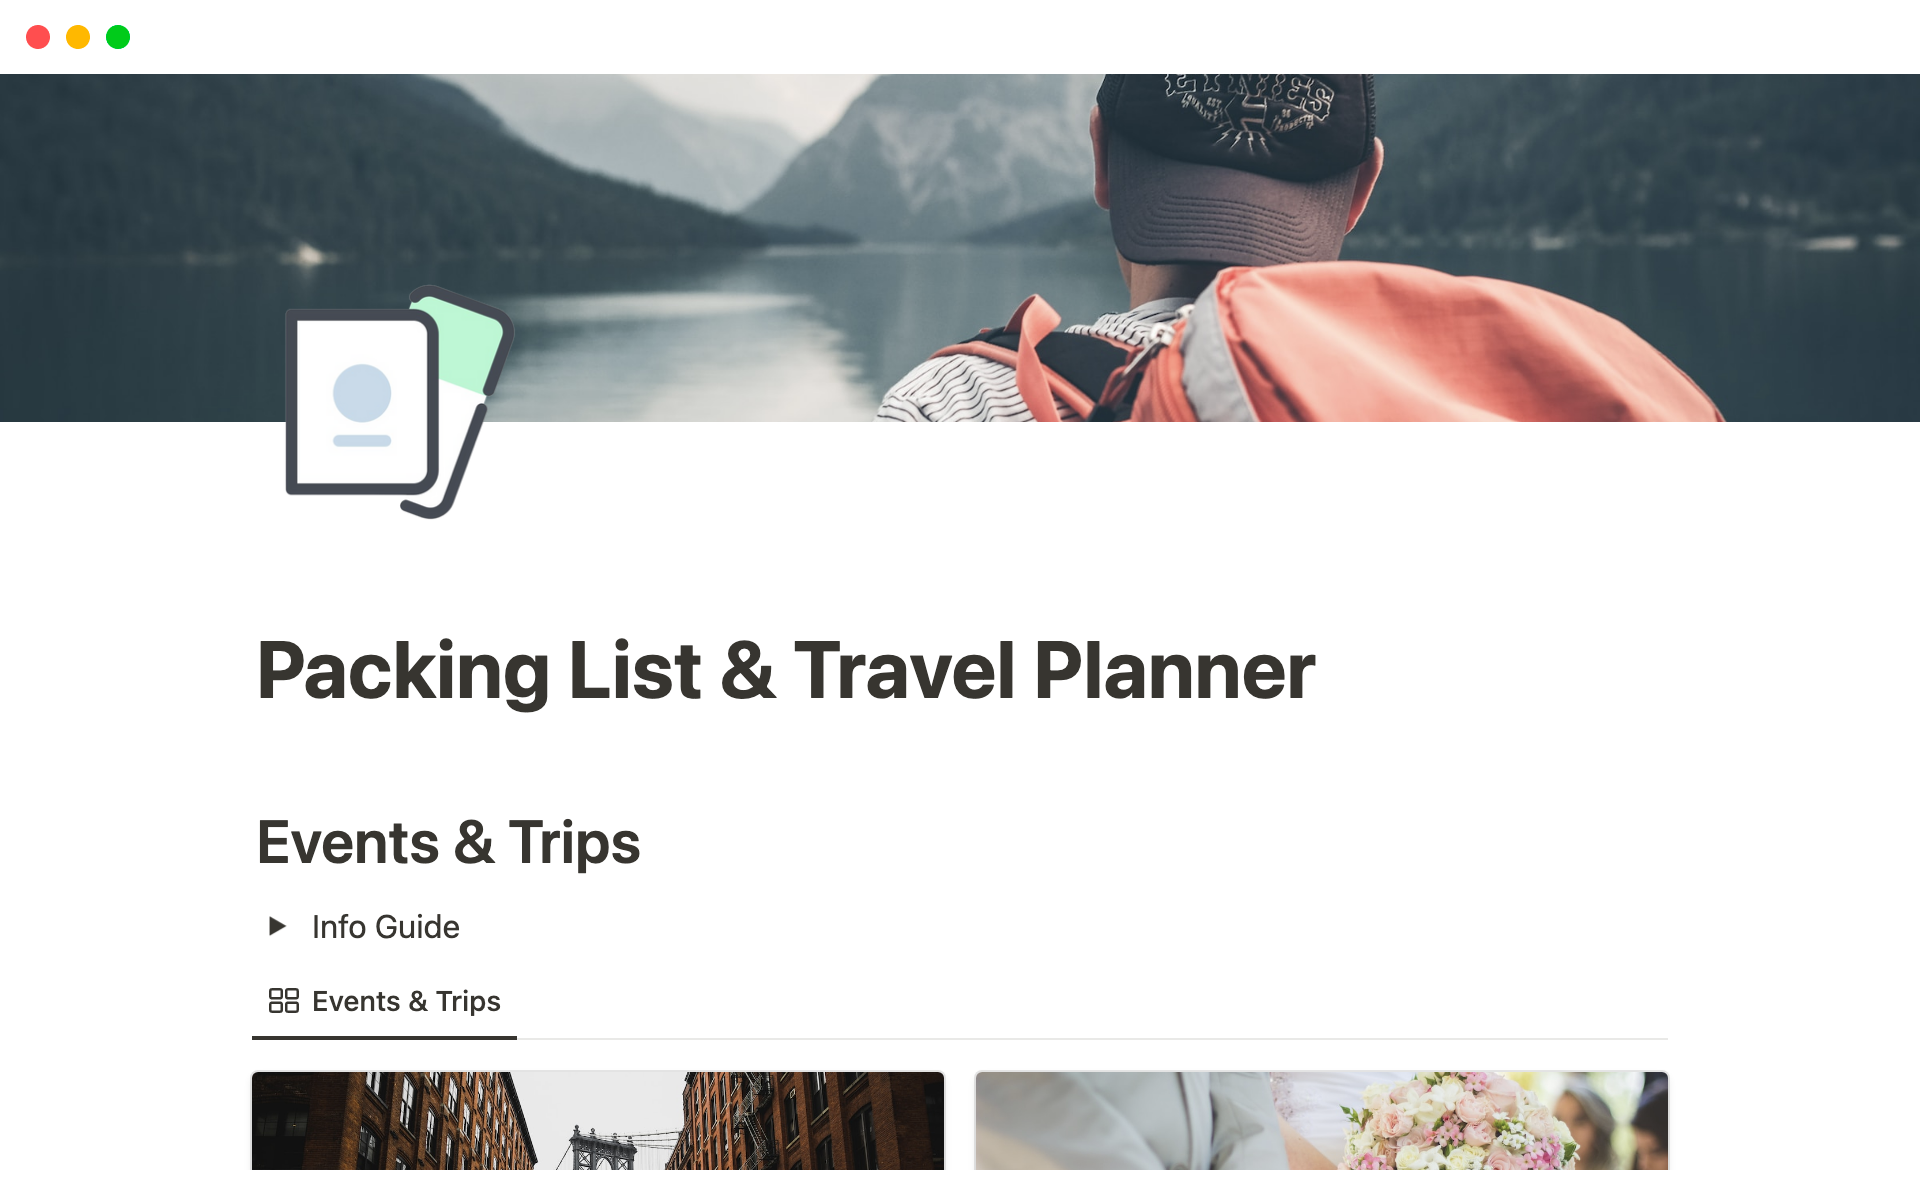 A handy packing list & travel planner for any occasion